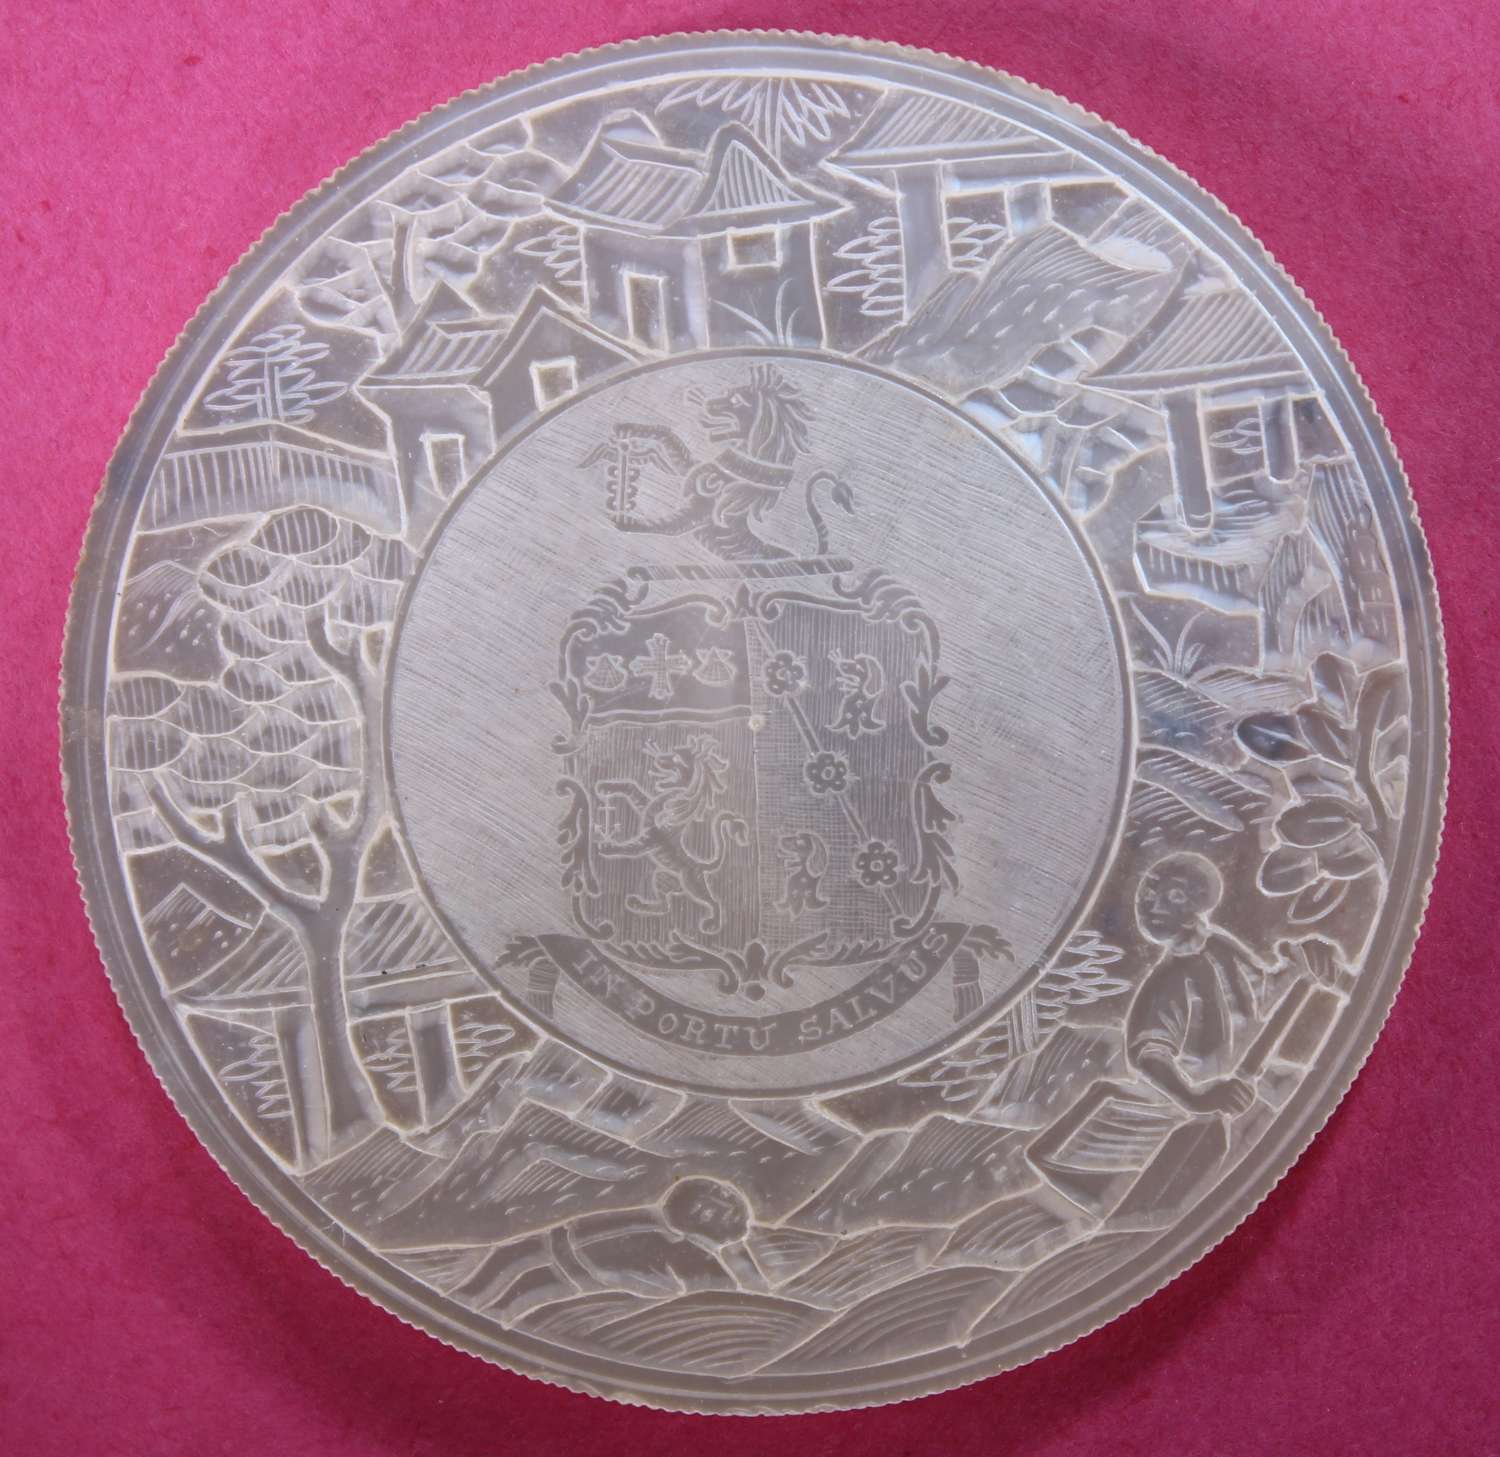 EXCEPTIONAL LARGE DEEP-CARVED ARMORIAL